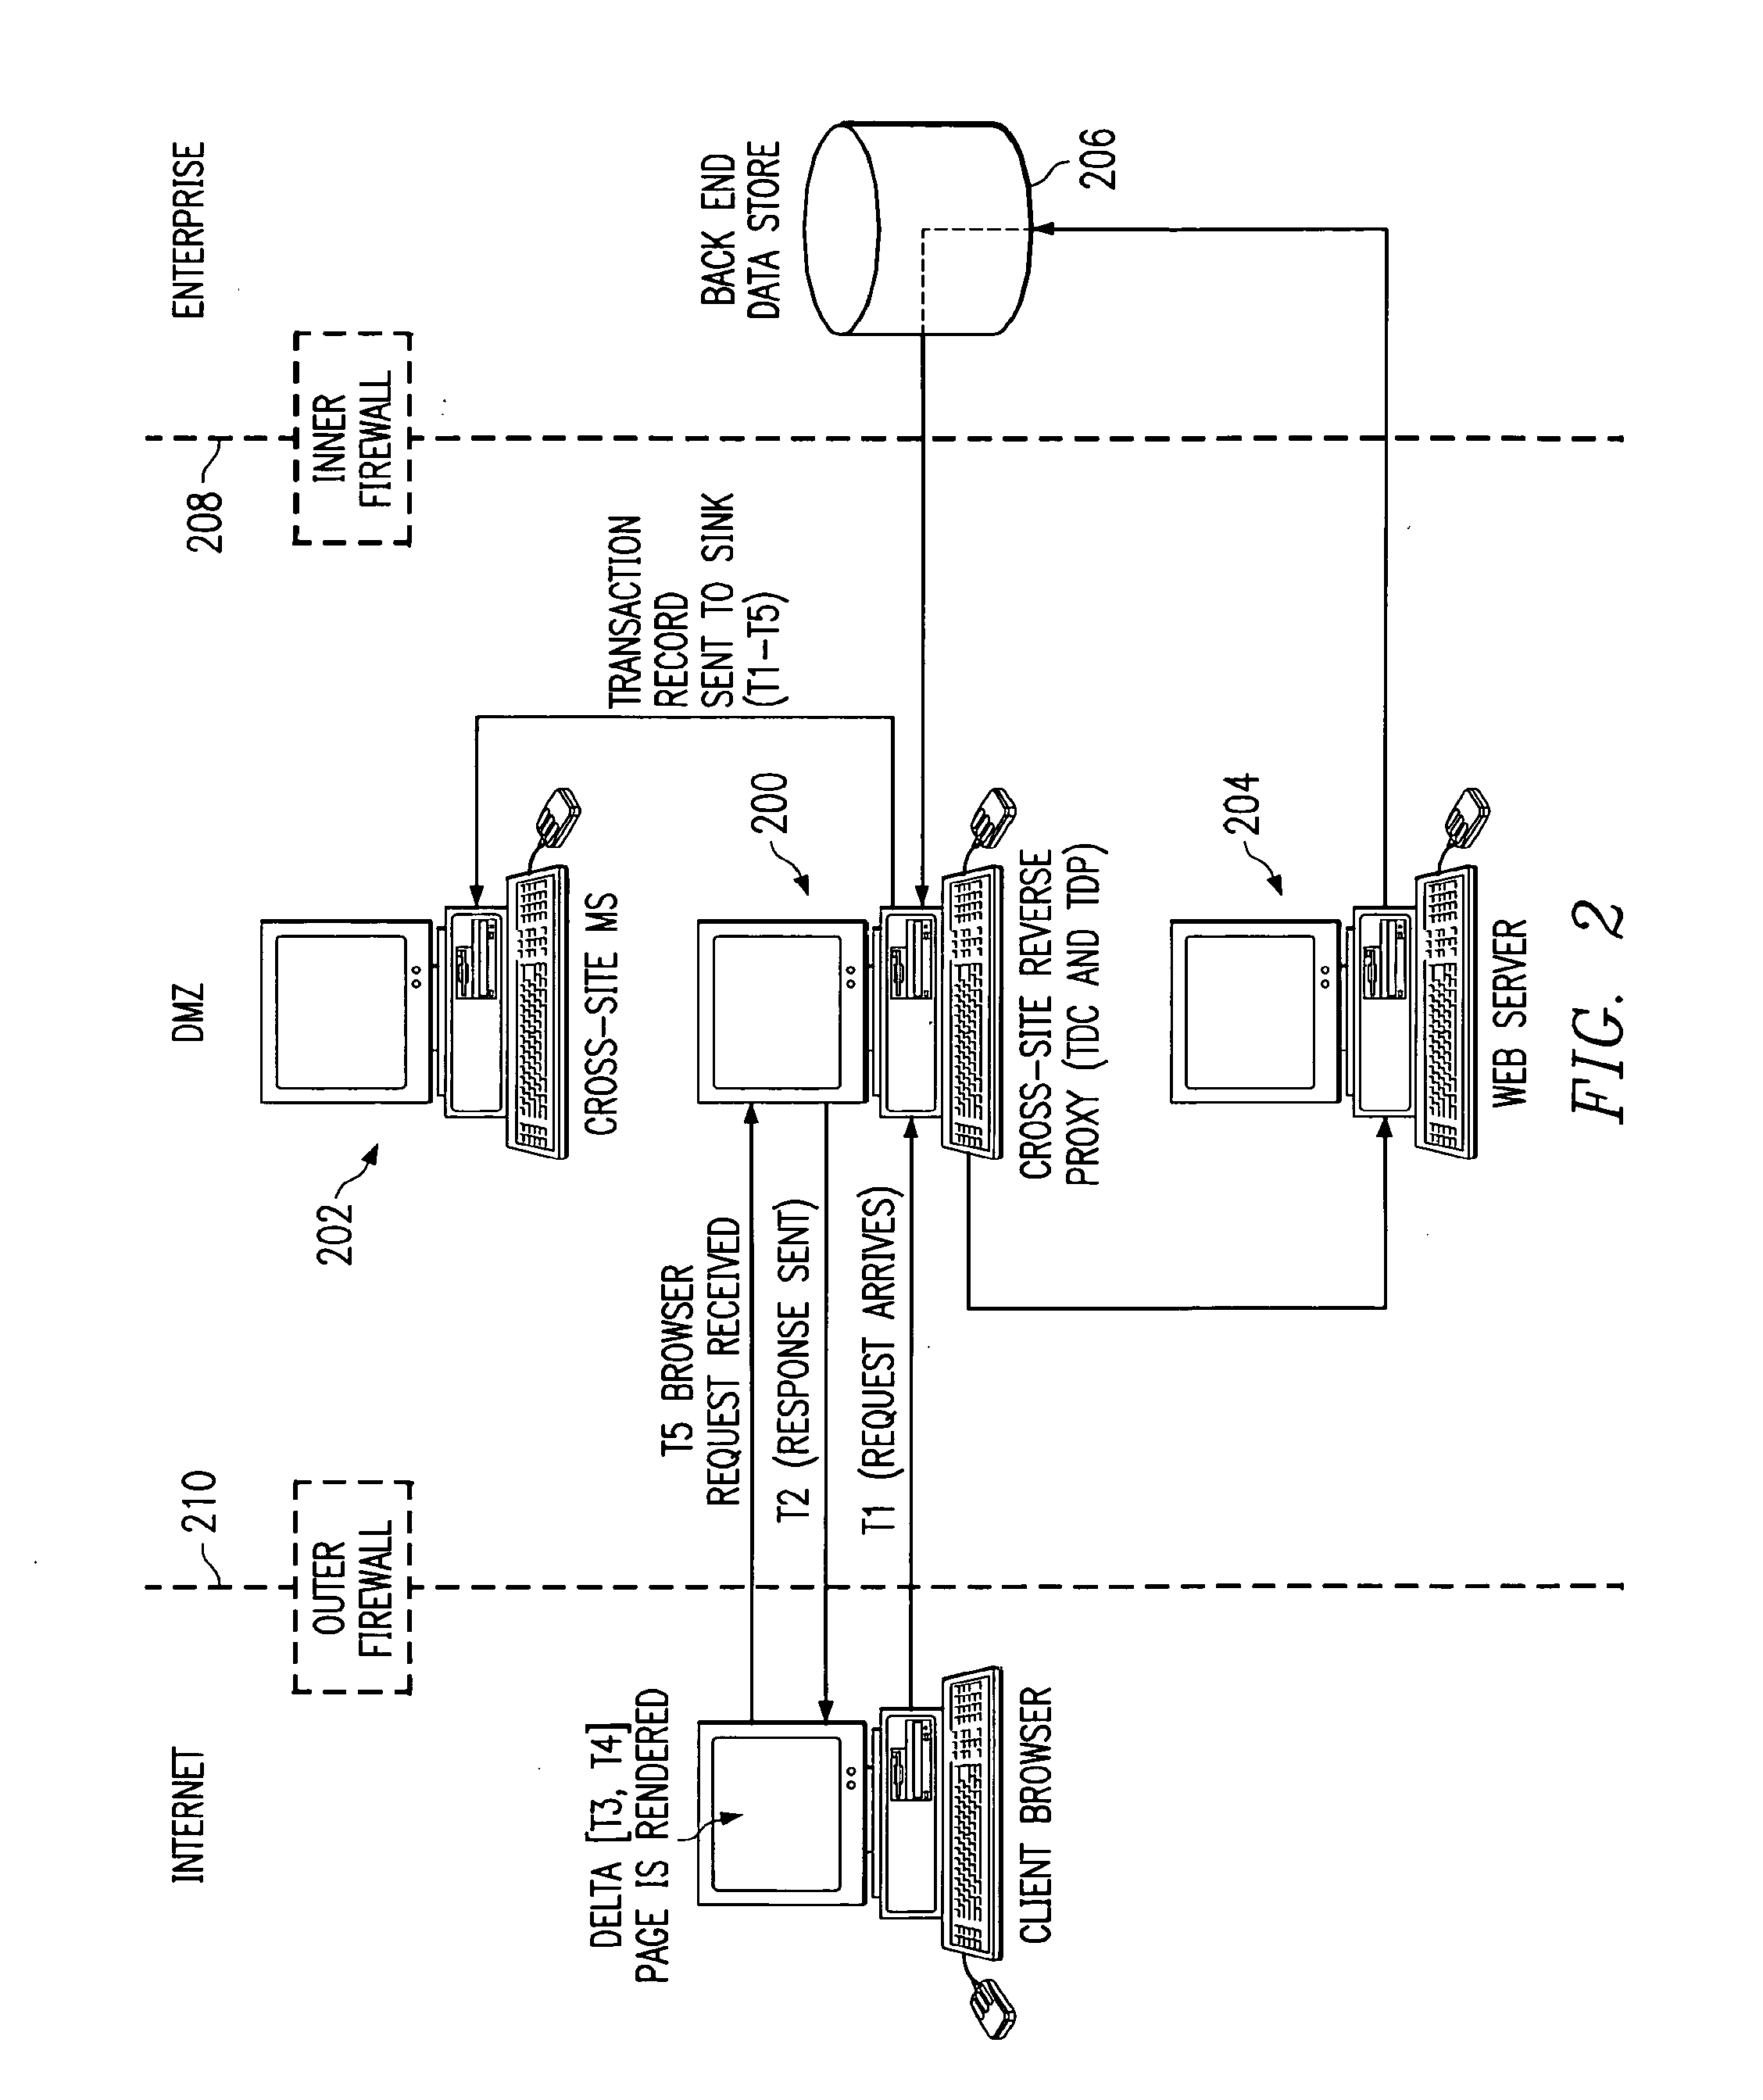 Method and Apparatus for Measuring Web Site Performance